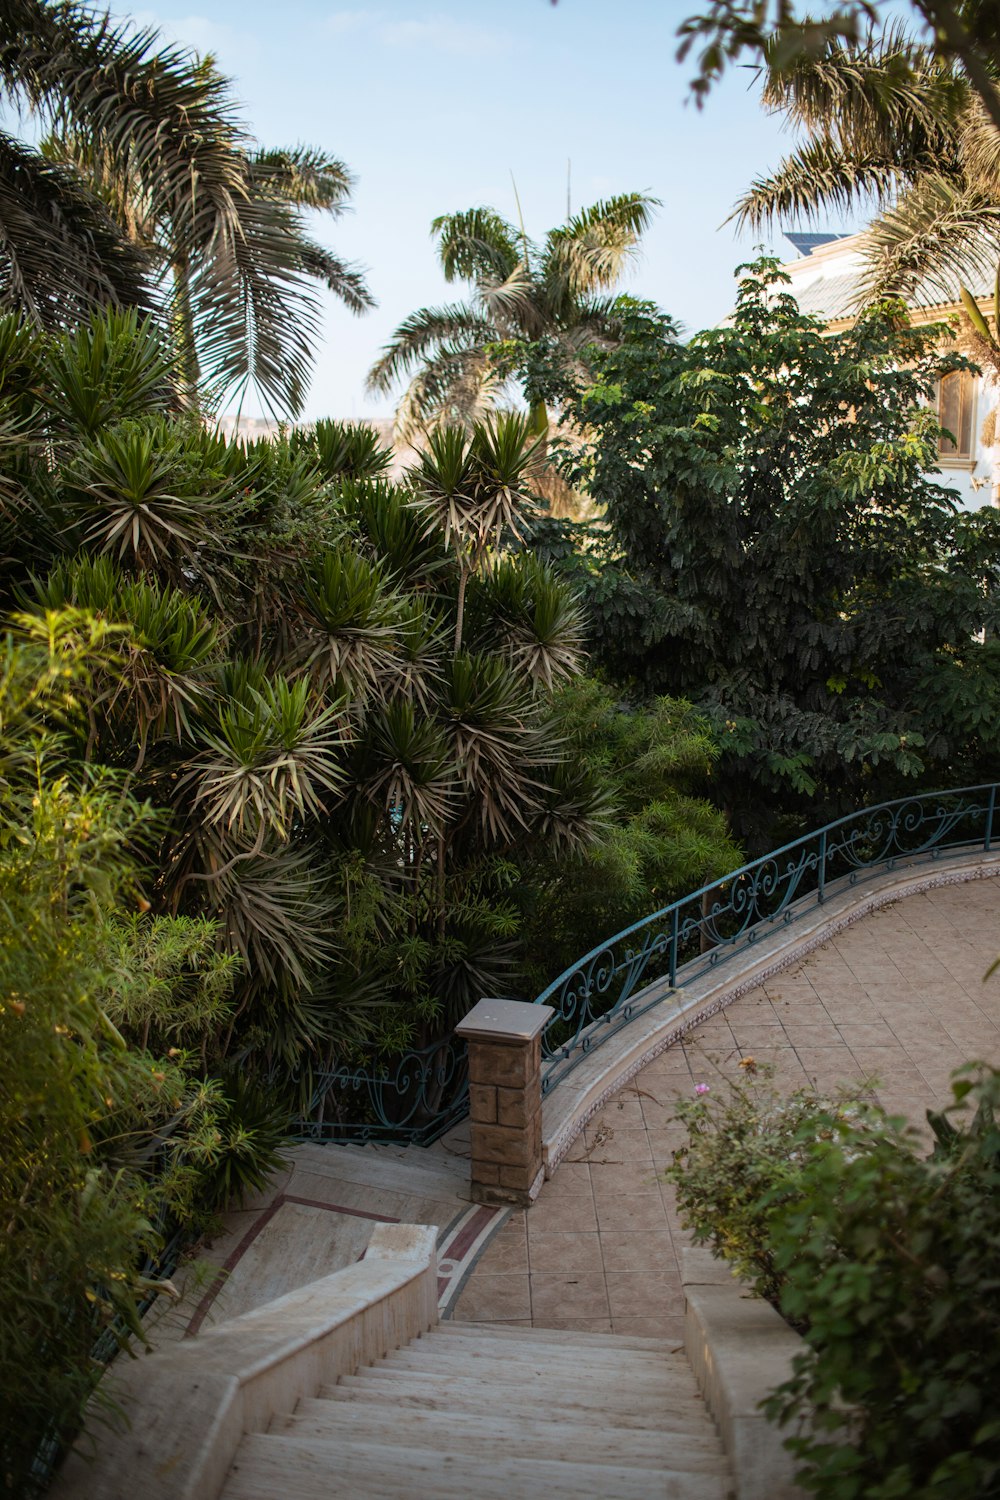 a view of a staircase with palm trees in the background